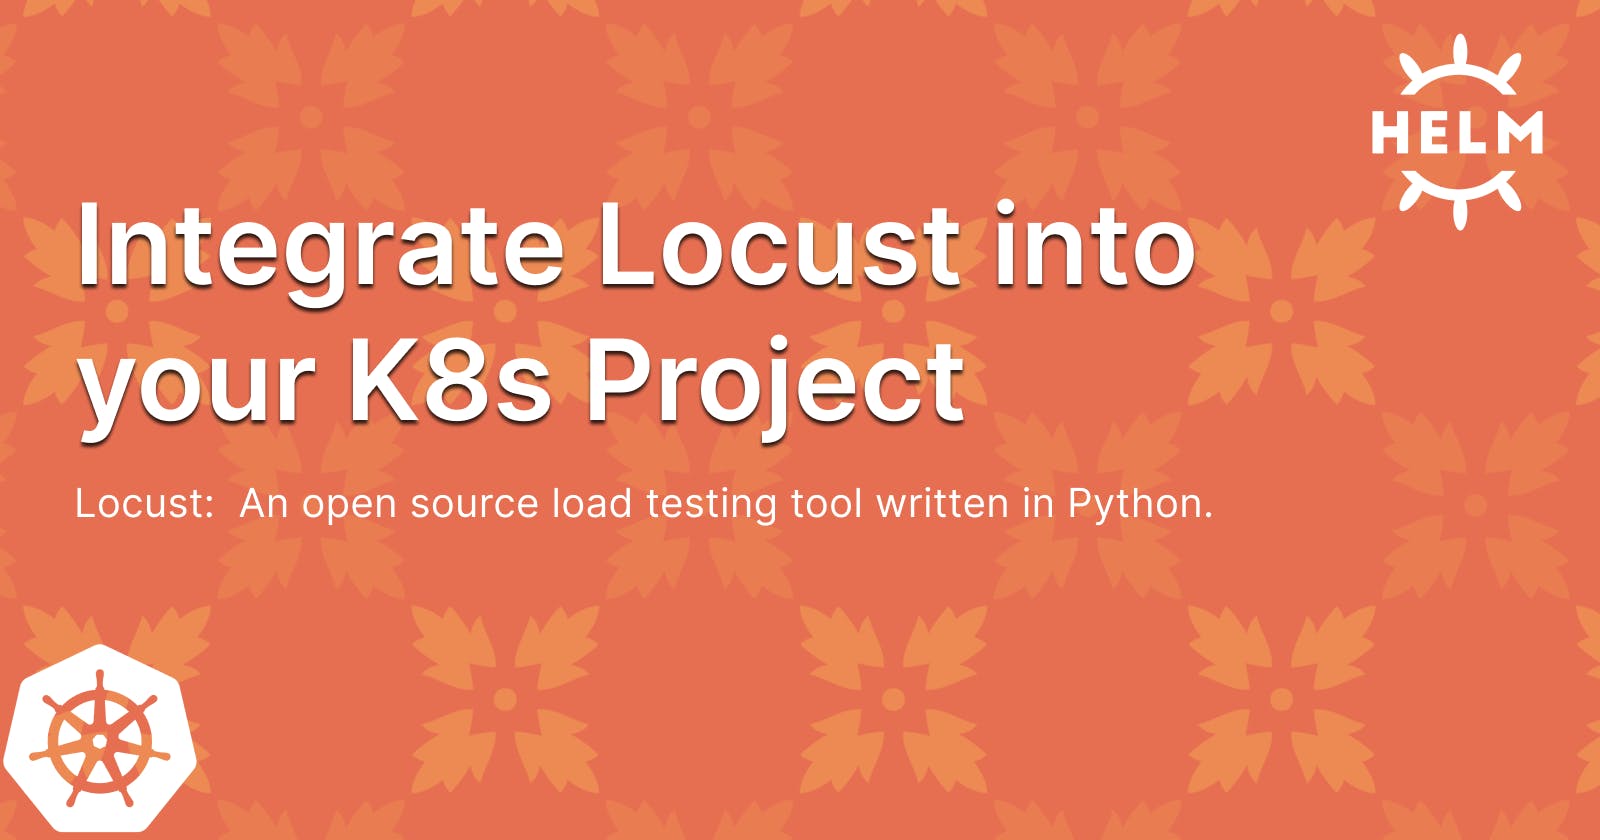 Integrate Locust into your K8s Project